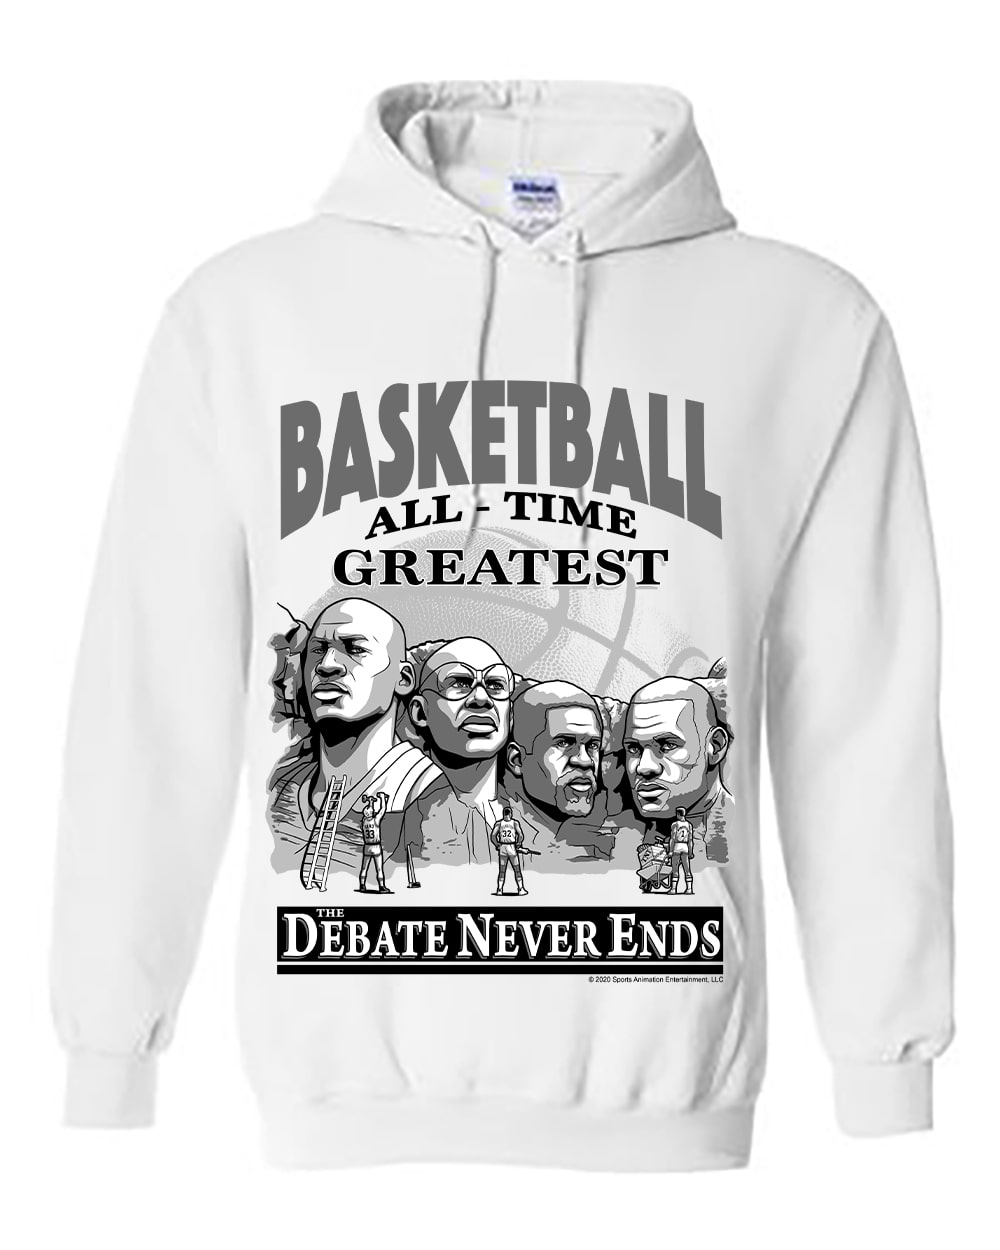 Mount Rushmore - Basketball All-Time Greatest (White Heavy Duty Hoodie)